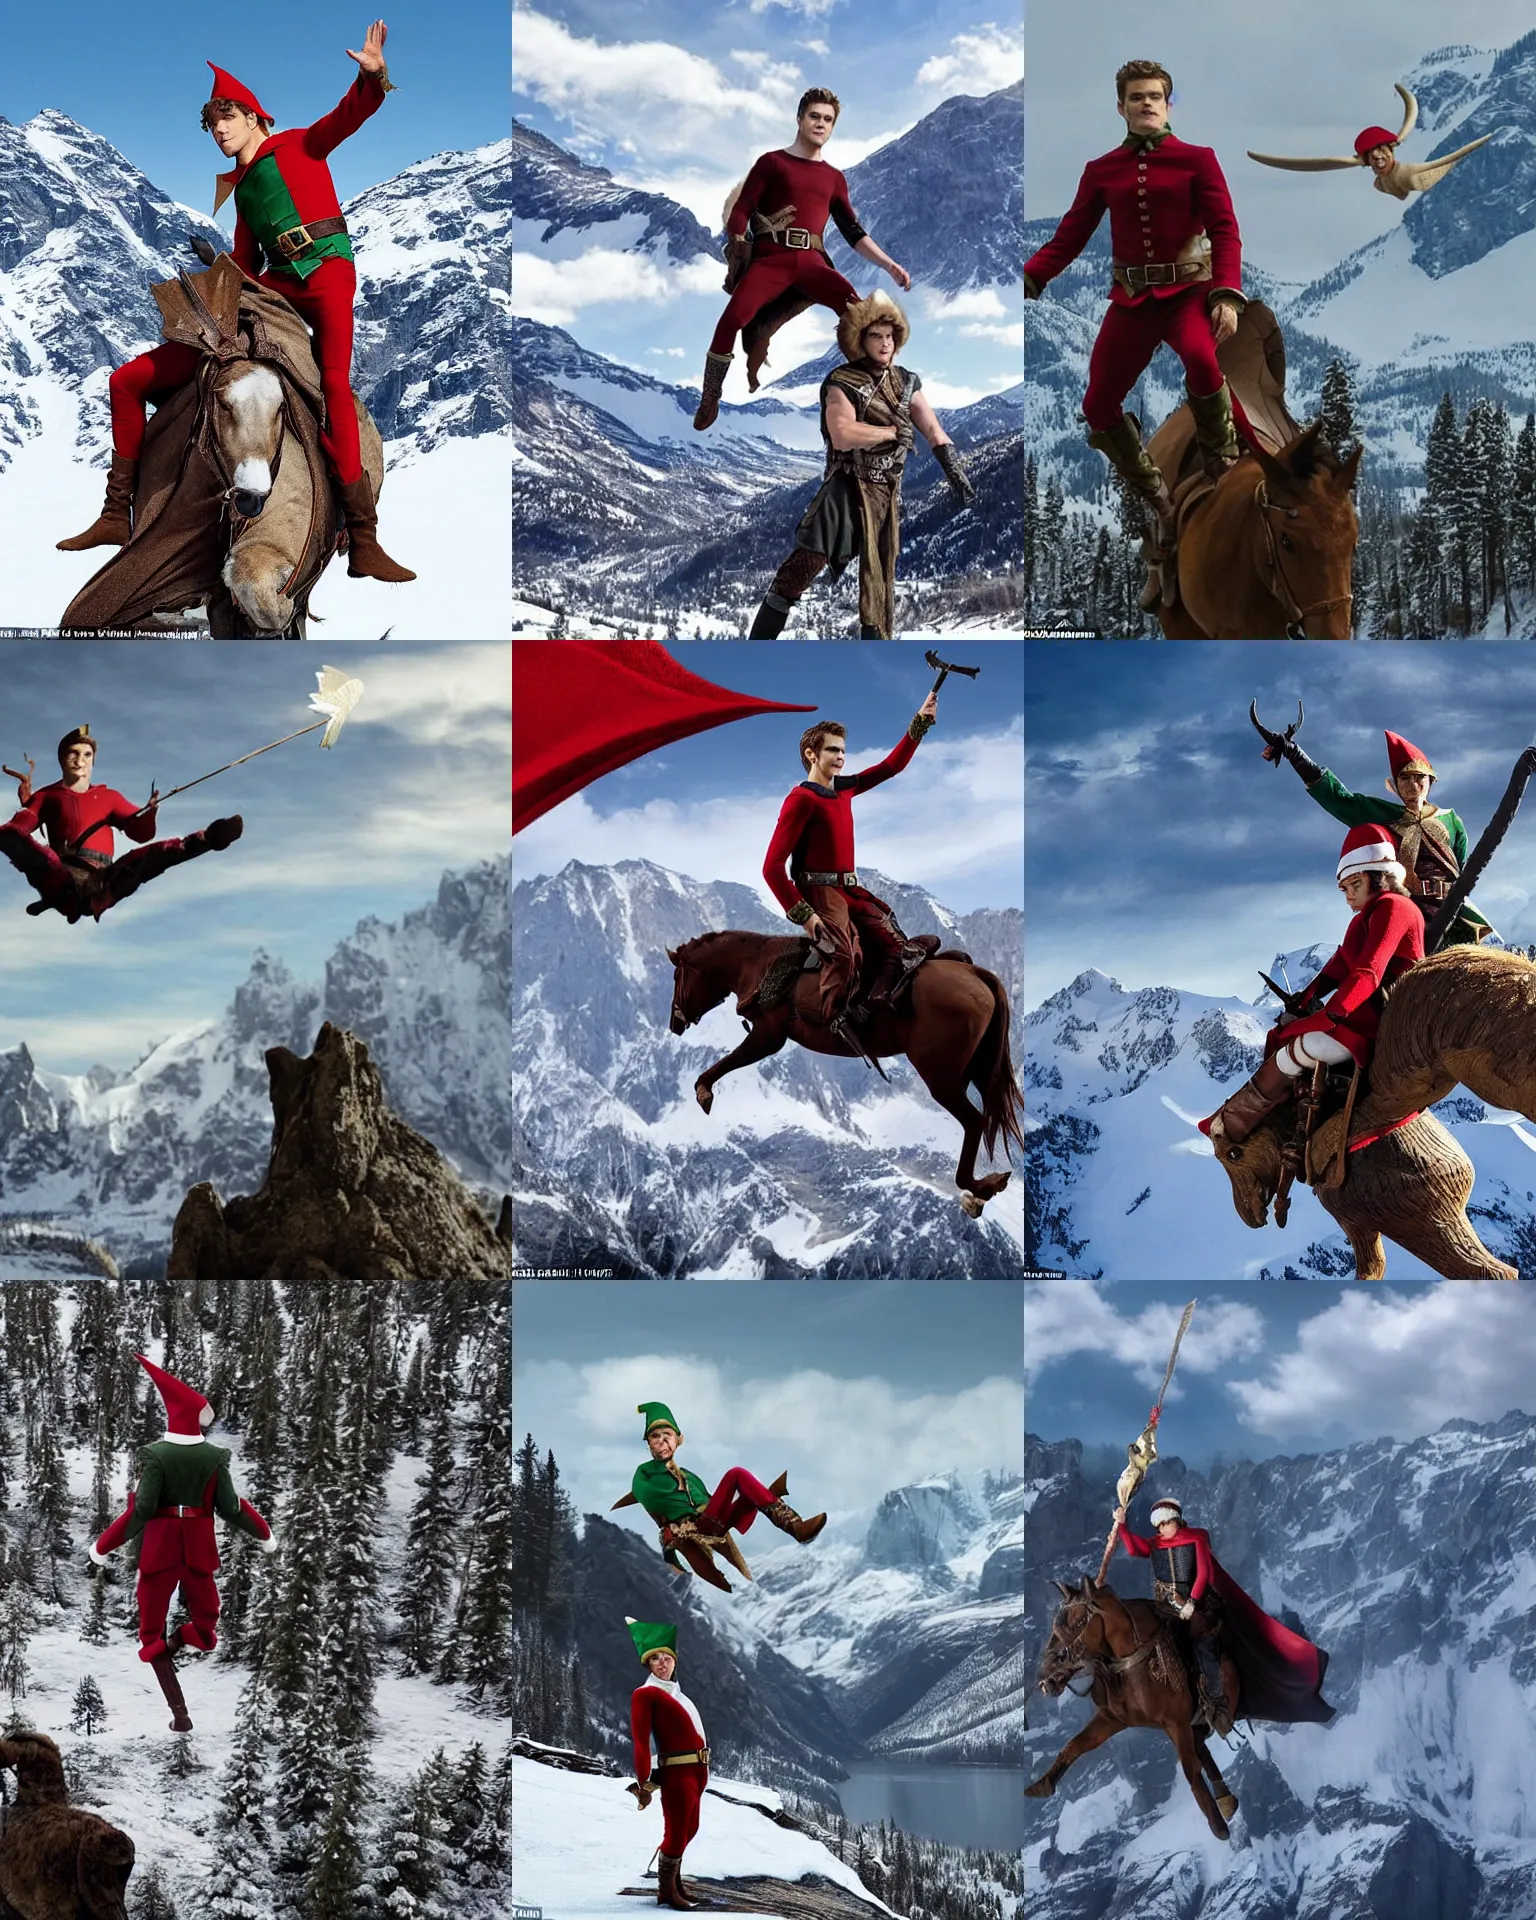 Prompt: Actor Paul Wesley, dressed as an Elf Ranger, rides bareback style on top of a giant Eagle as it soars over snowy mountains, photorealistic and cinematic